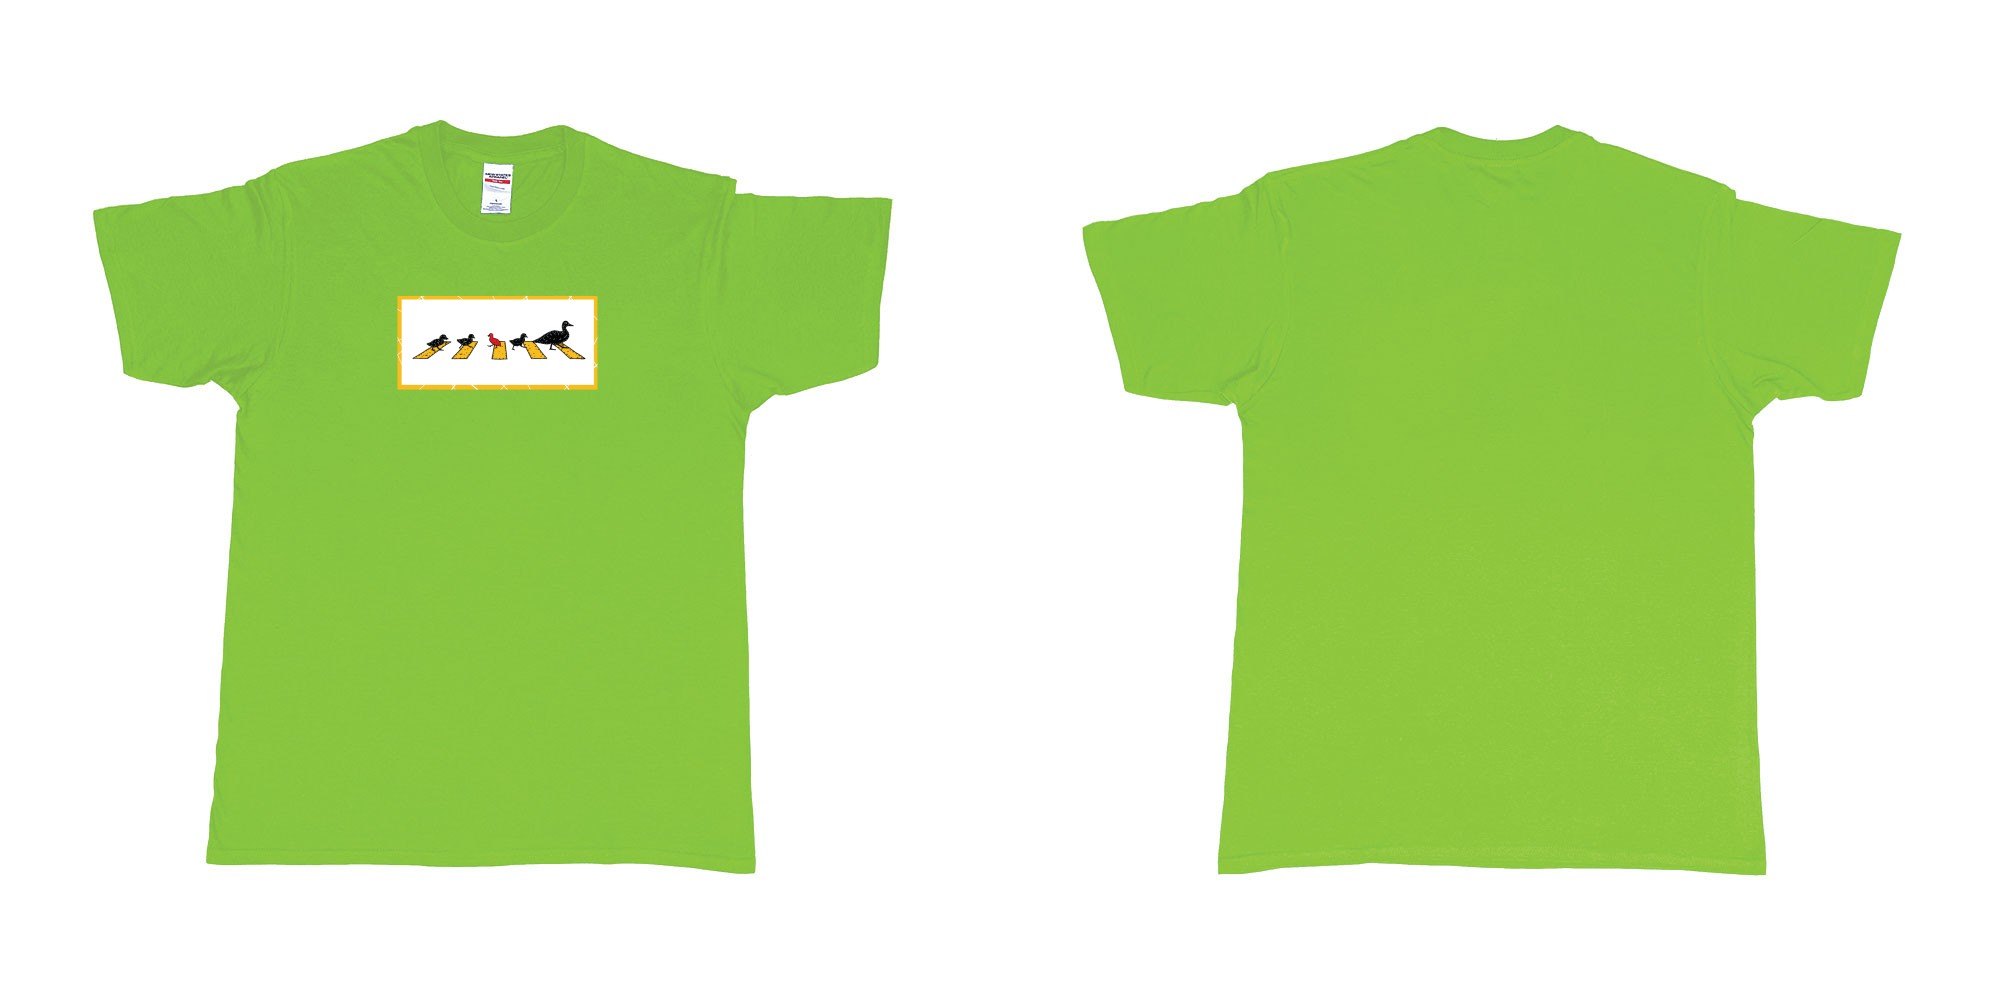 Custom tshirt design 4481 ducks in fabric color lime choice your own text made in Bali by The Pirate Way